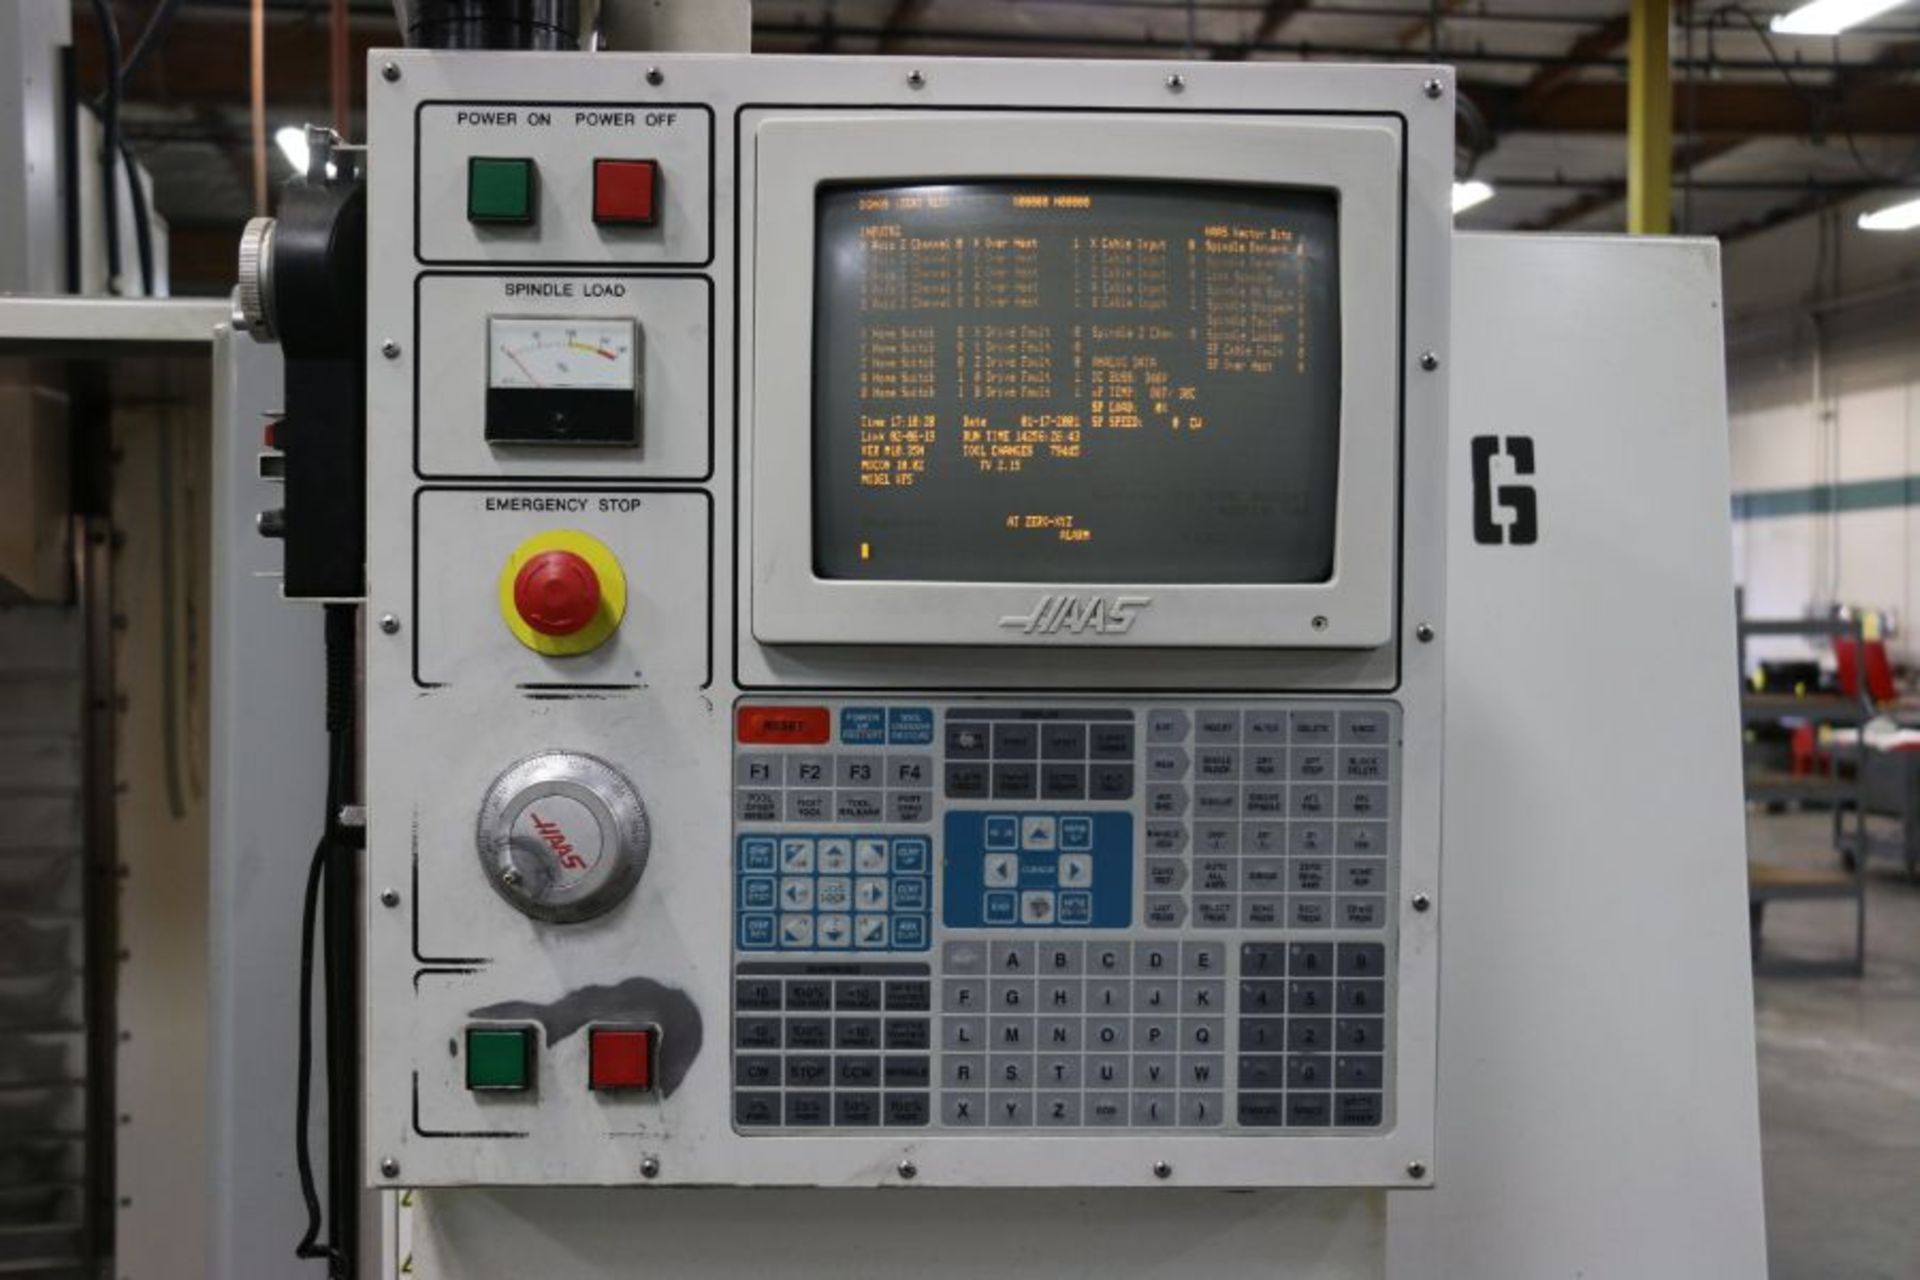 Haas VF-5, 50” x 26” x 25” Travels, 20 Position Tool Carousel, CT-40 Taper, s/n 19337, New 2000 - Image 11 of 13